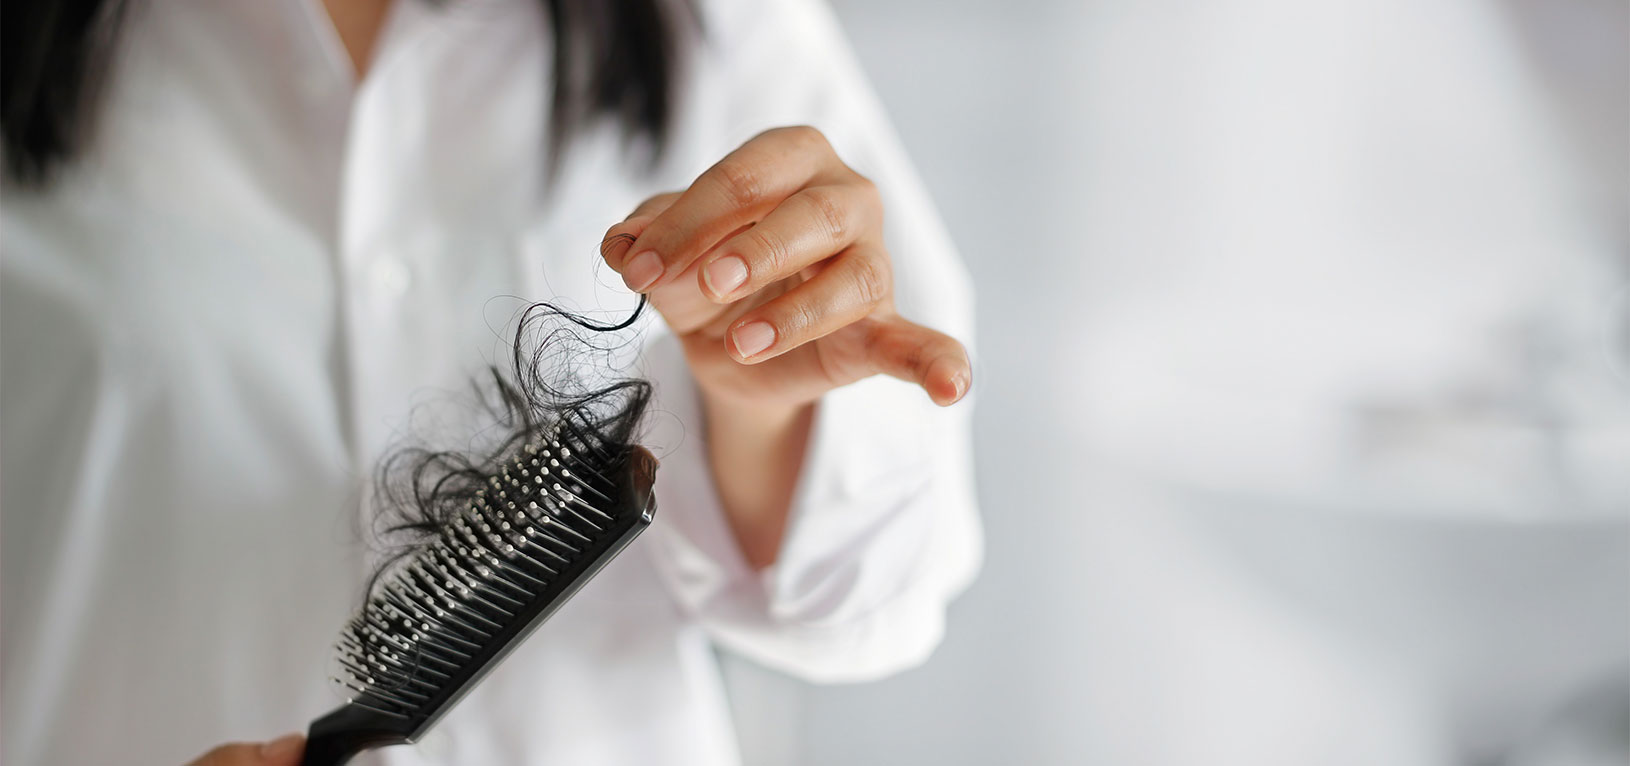 Little Rock Hair Treatments, Hair Replacement and Hair Loss Specialists